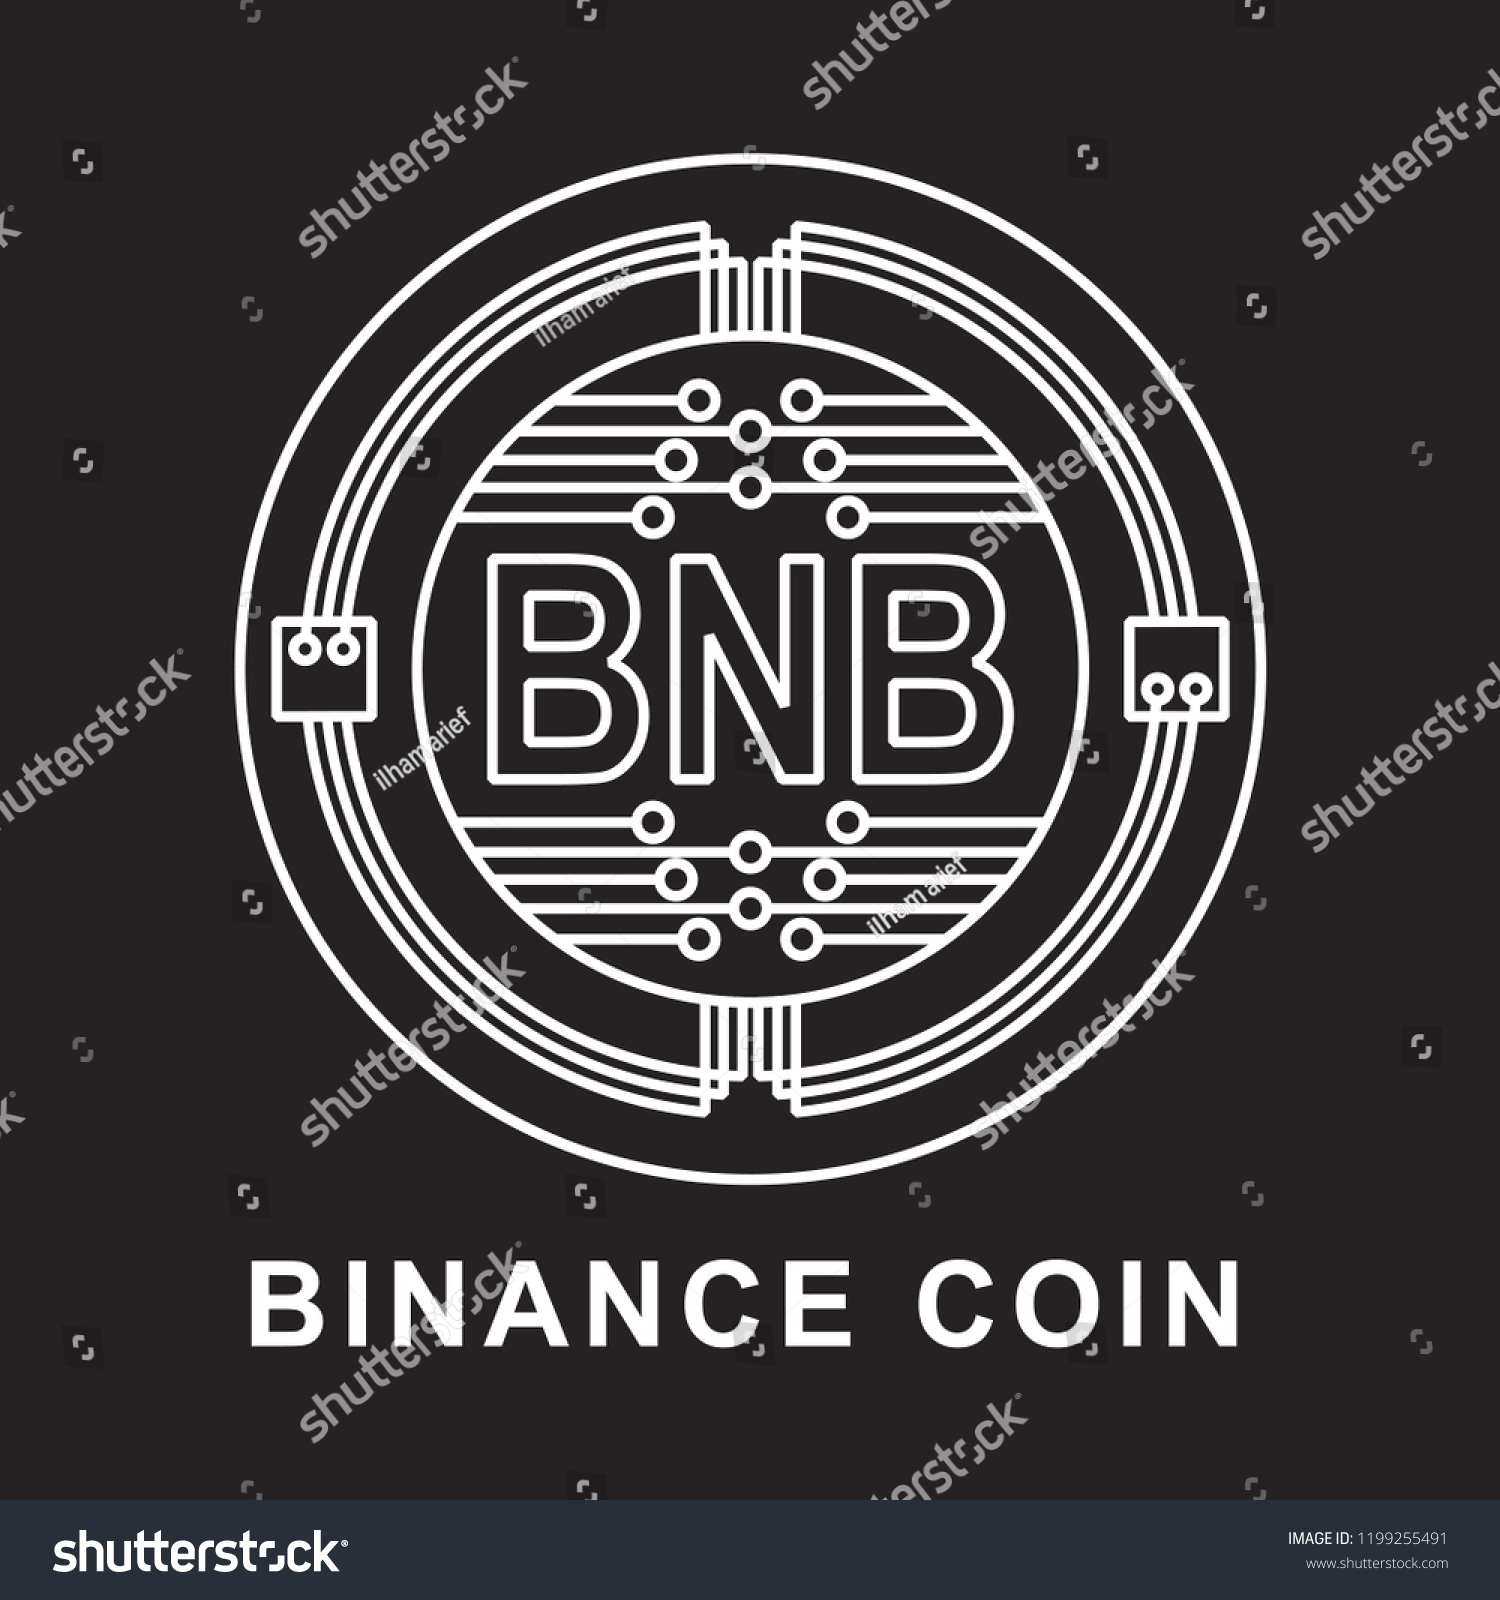 SVG of balance coin Cryptocurrency  icon with black background svg